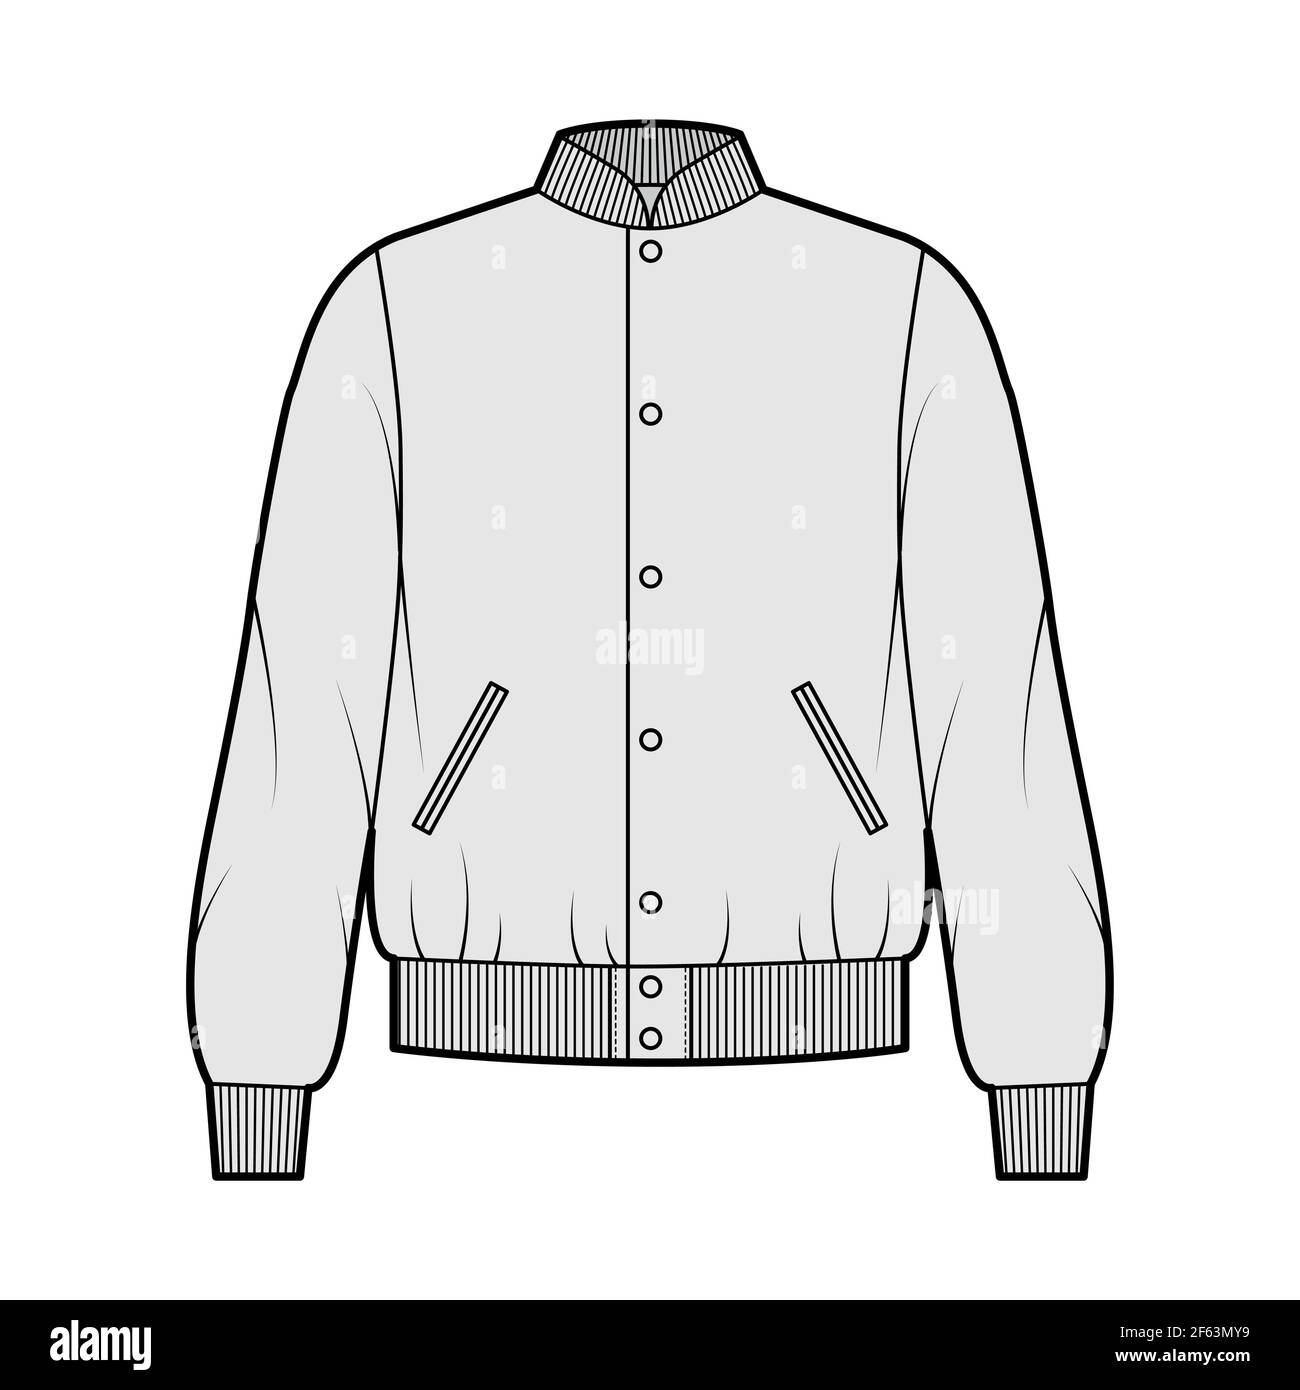 Varsity Bomber jacket technical fashion illustration with Rib collar, cuffs, waistband, jetted pockets, buttons fastening, oversized. Flat coat template front, grey color. Women men unisex top CAD Stock Vector